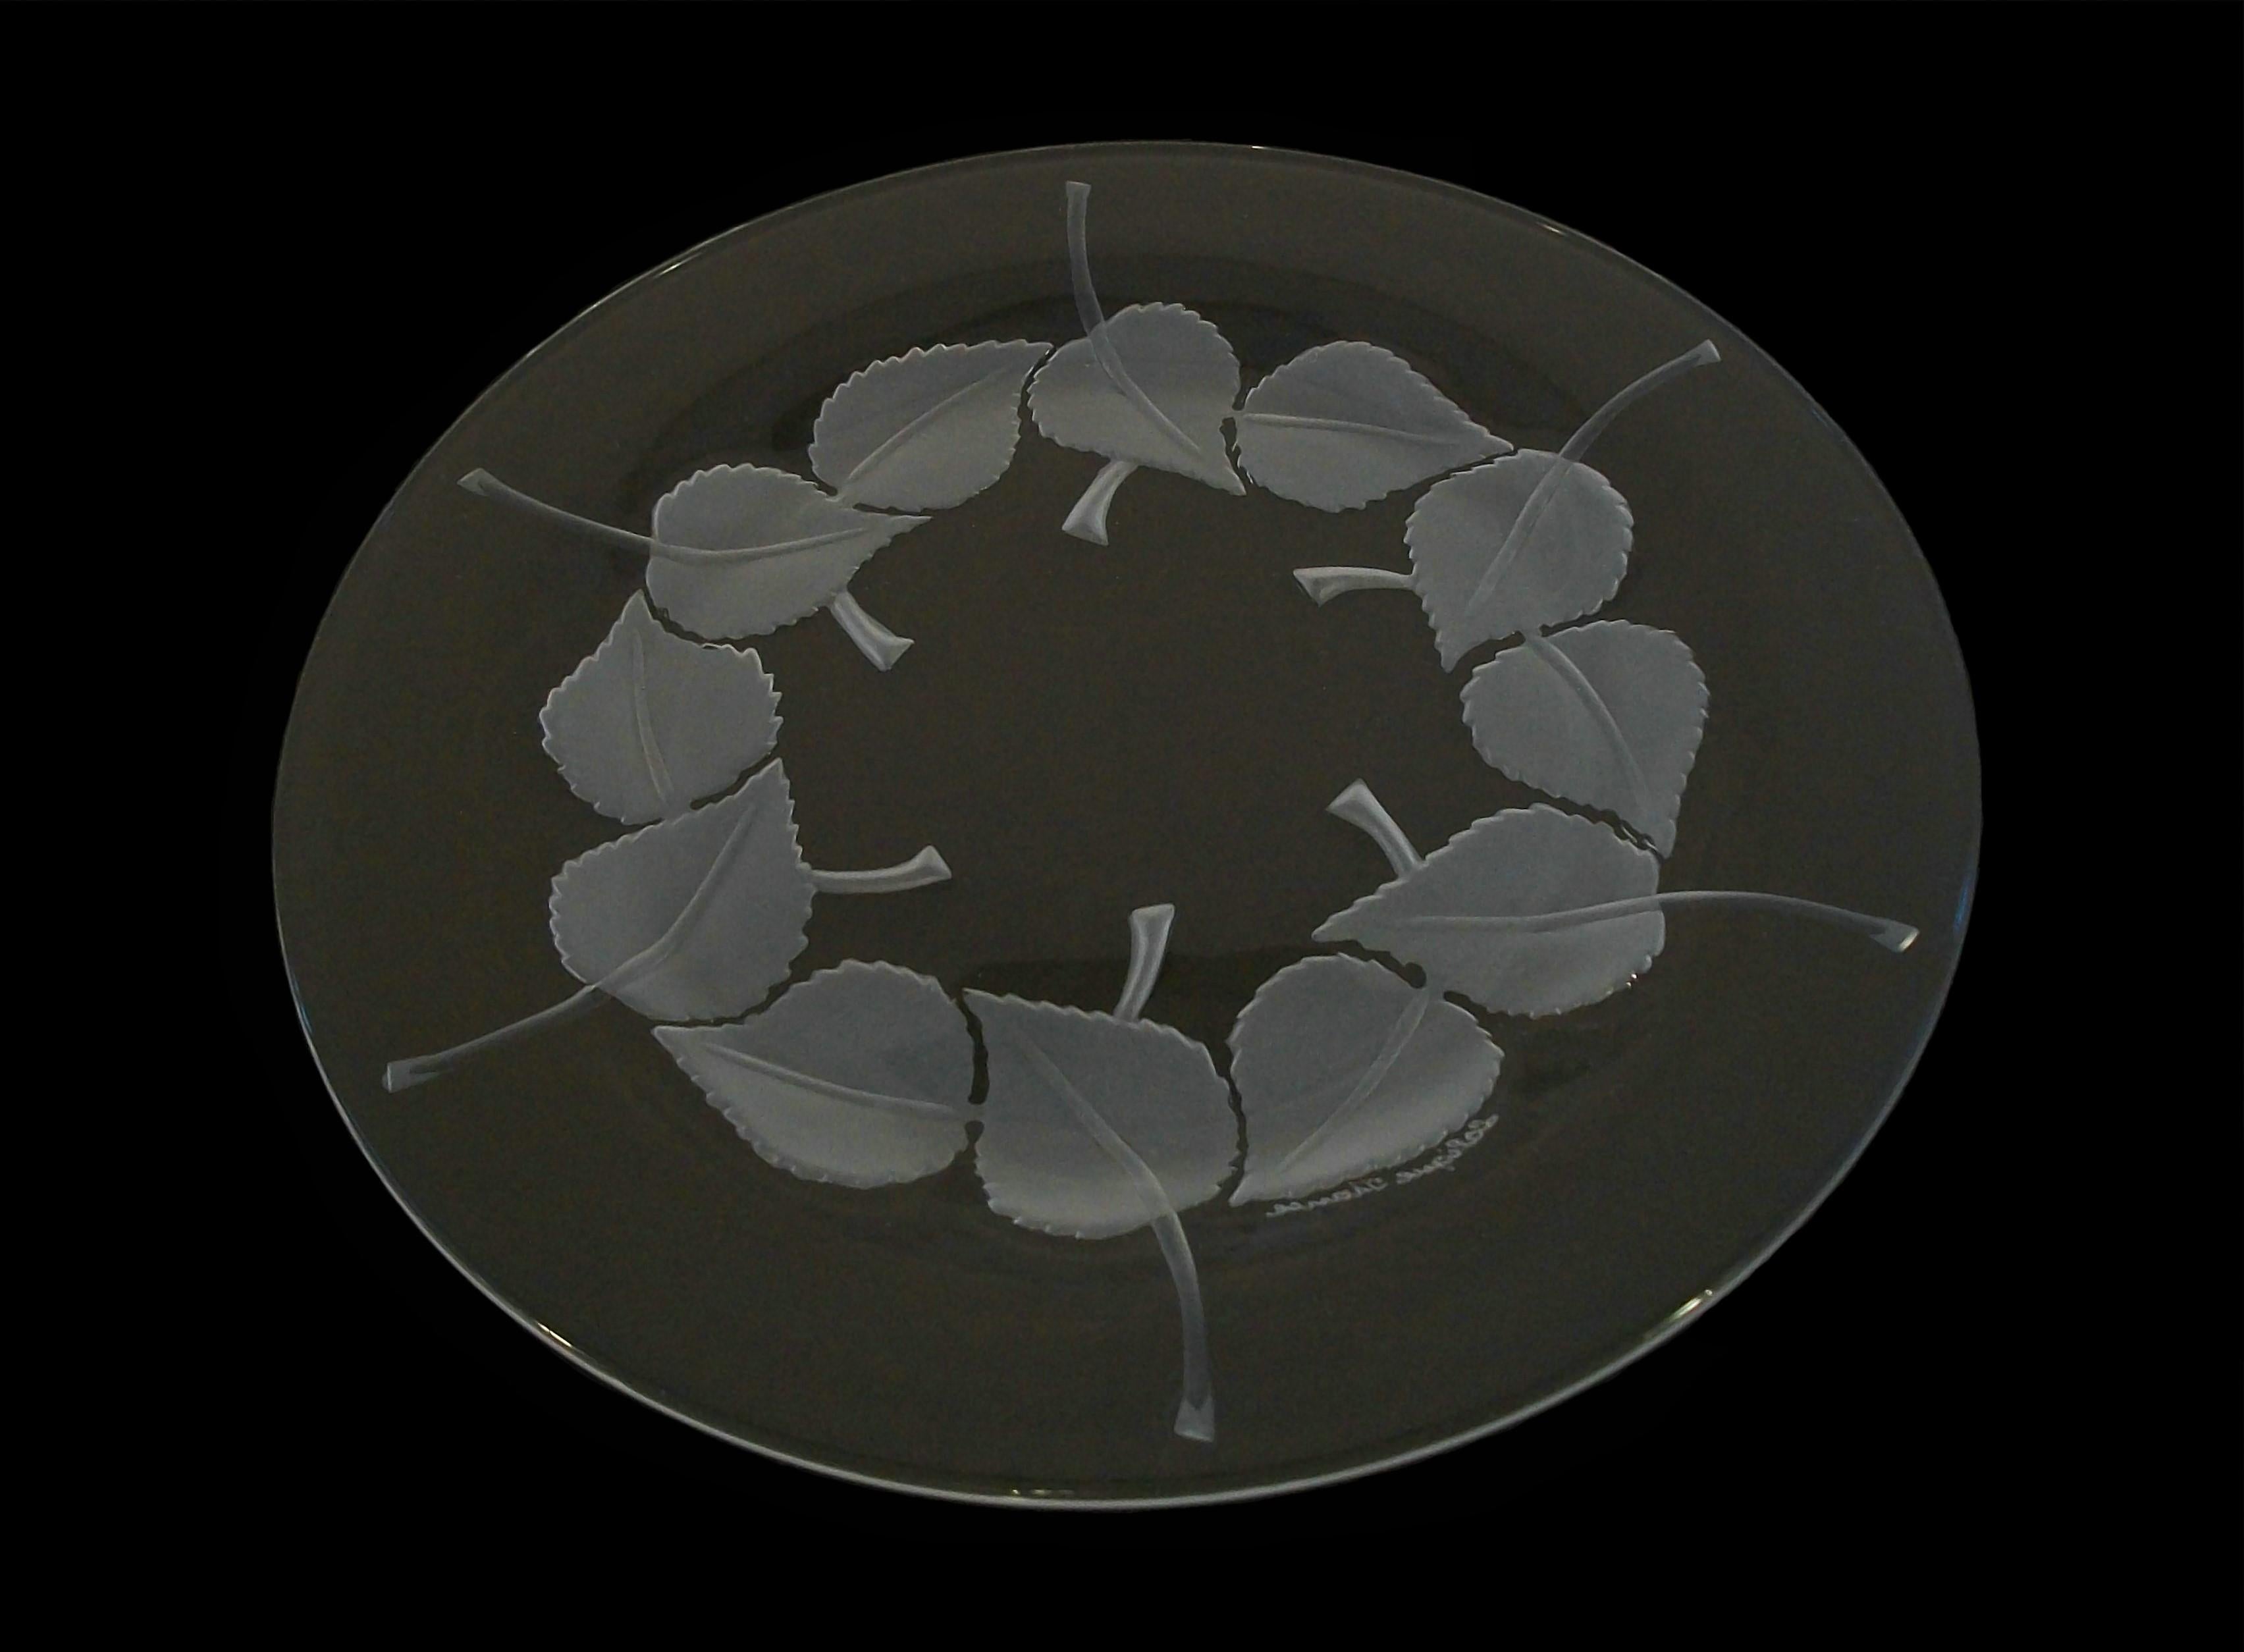 LALIQUE - 'Rolleboise' - Vintage Art Deco style luxury crystal plate - featuring a striking frosted finish to the molded leaves from the back - contrasting clear polished finish to the front - etched signature on the base - France - late 20th